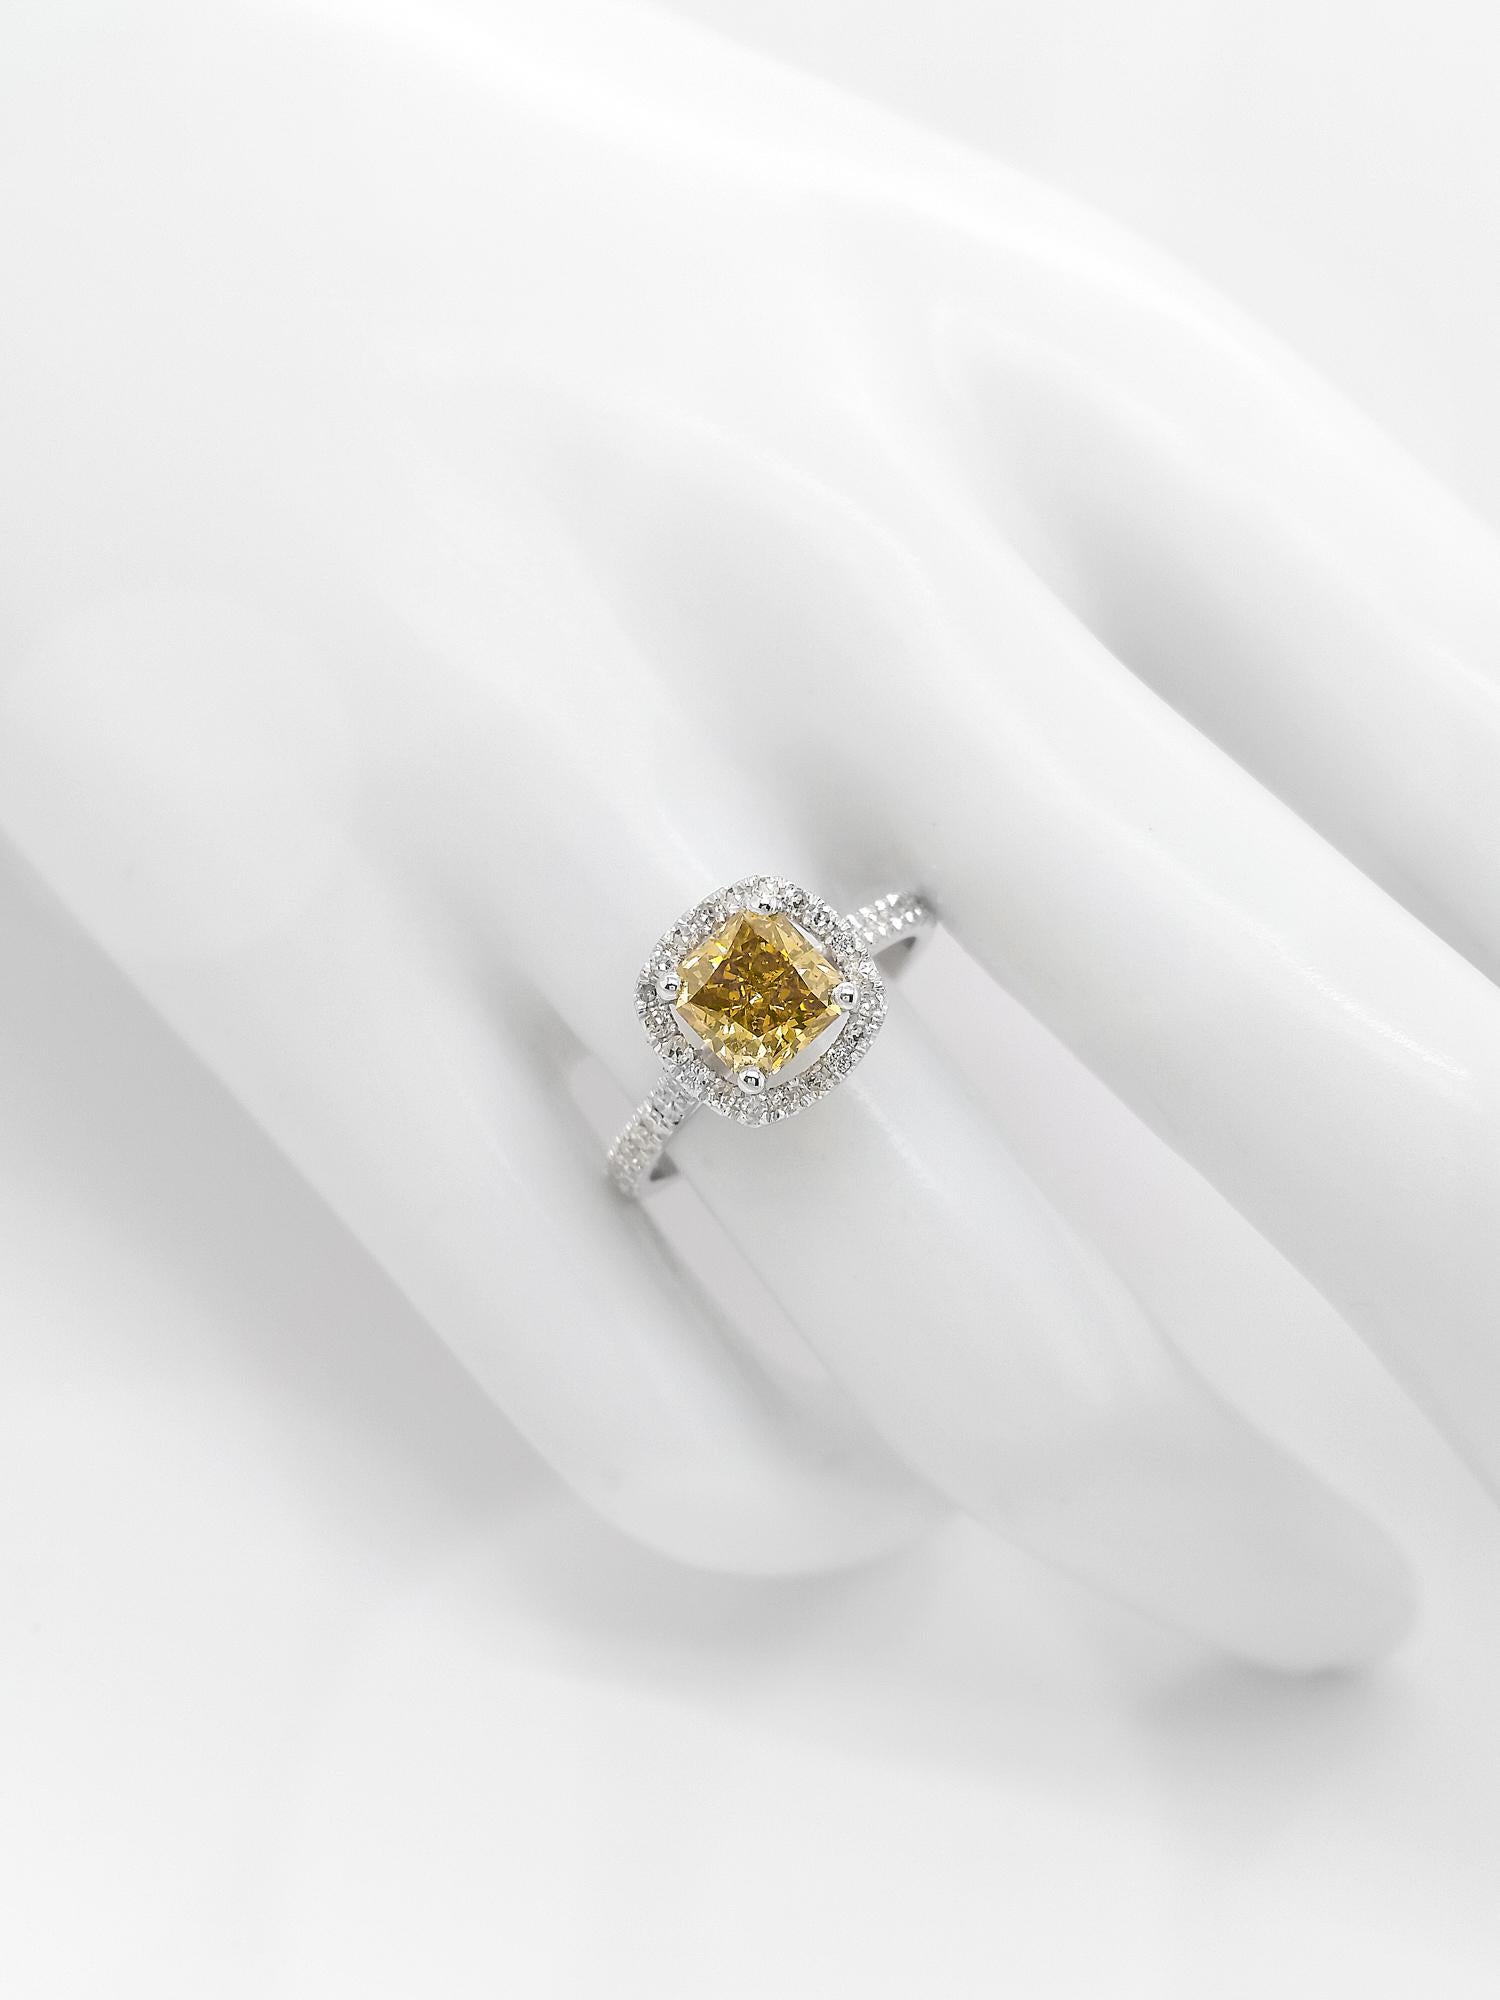 FOR U.S. BUYERS NO VAT 

In this elegant and classy 14kt white gold ring, 1.52 carat fancy greenish yellow diamond ring is surrounded by 38 natural round brilliant diamonds totaling 0.35 carats round brilliant diamonds and creating a very gentle and